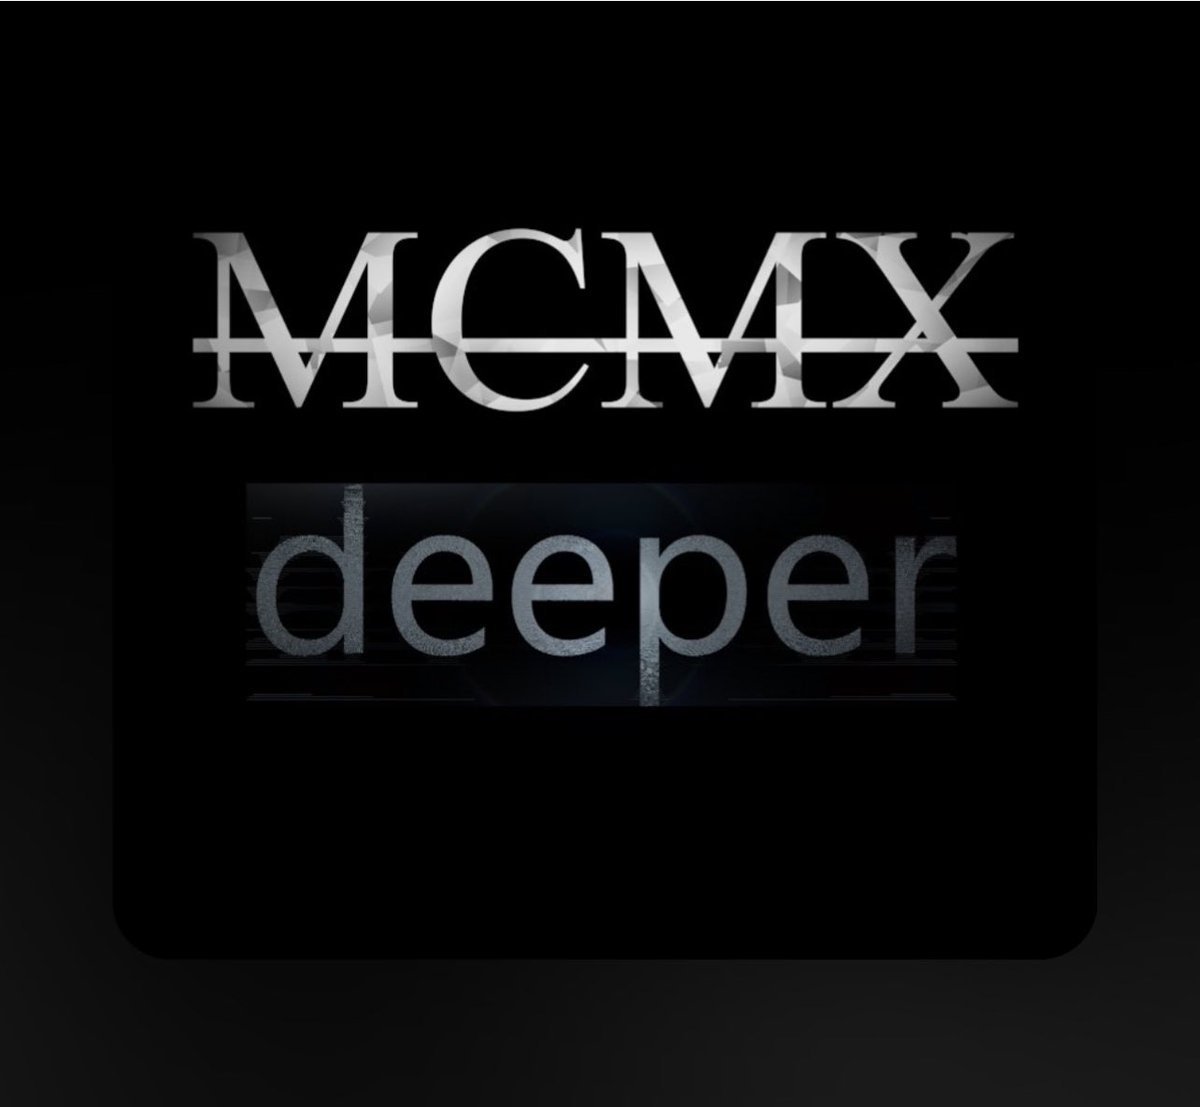 DEEPER is the first track from our MCMX project and to celebrate the launch and thank our supporters, excited to say there is a little hidden exclusive accompanying the release. Shhh!😎🦋 DEEPER - MCMX - 3 May '24 machina-x.bandcamp.com #BandcampFriday #NewMusic #cinematic